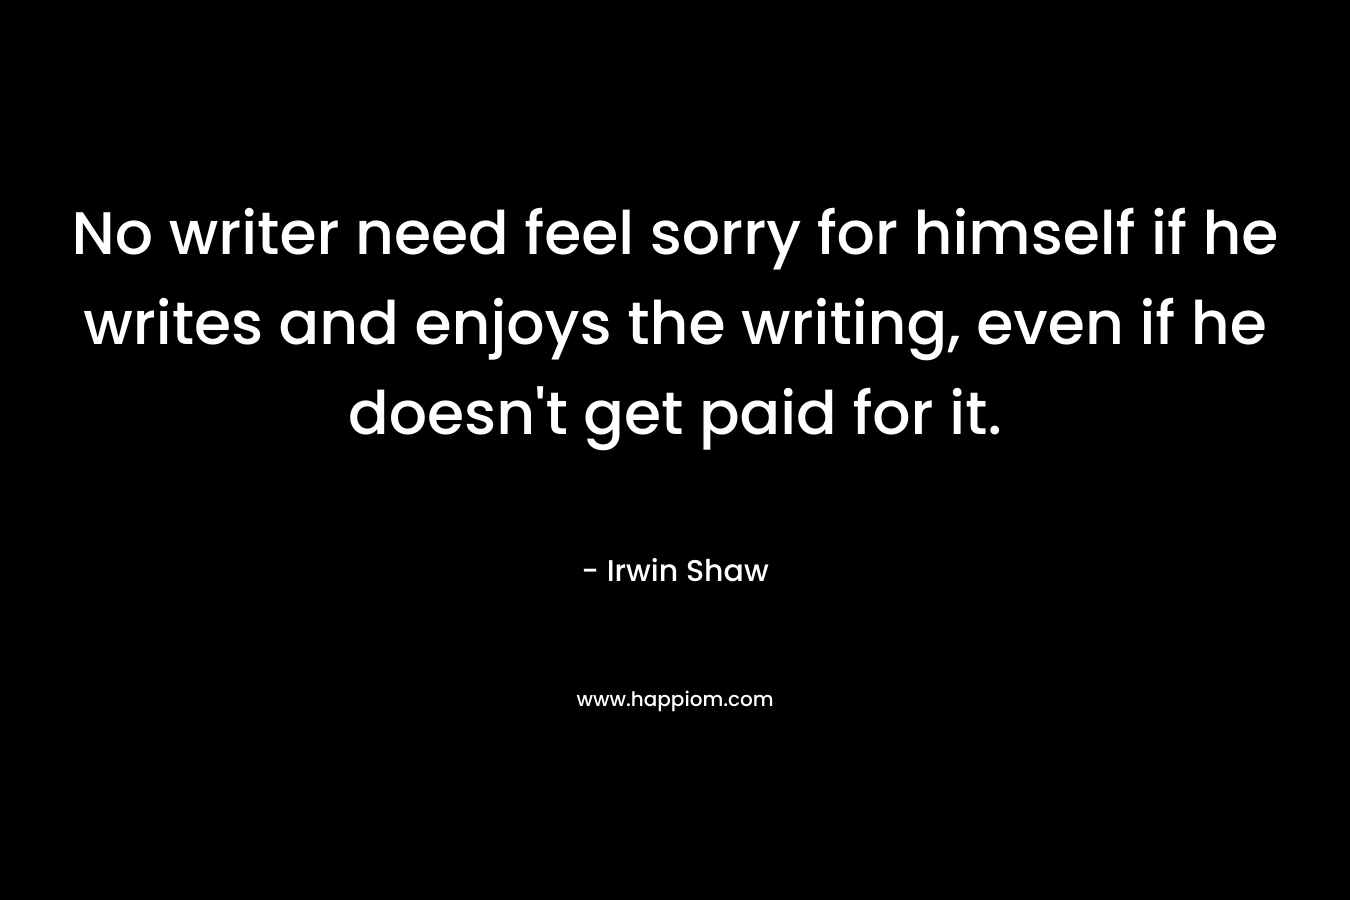 No writer need feel sorry for himself if he writes and enjoys the writing, even if he doesn't get paid for it.